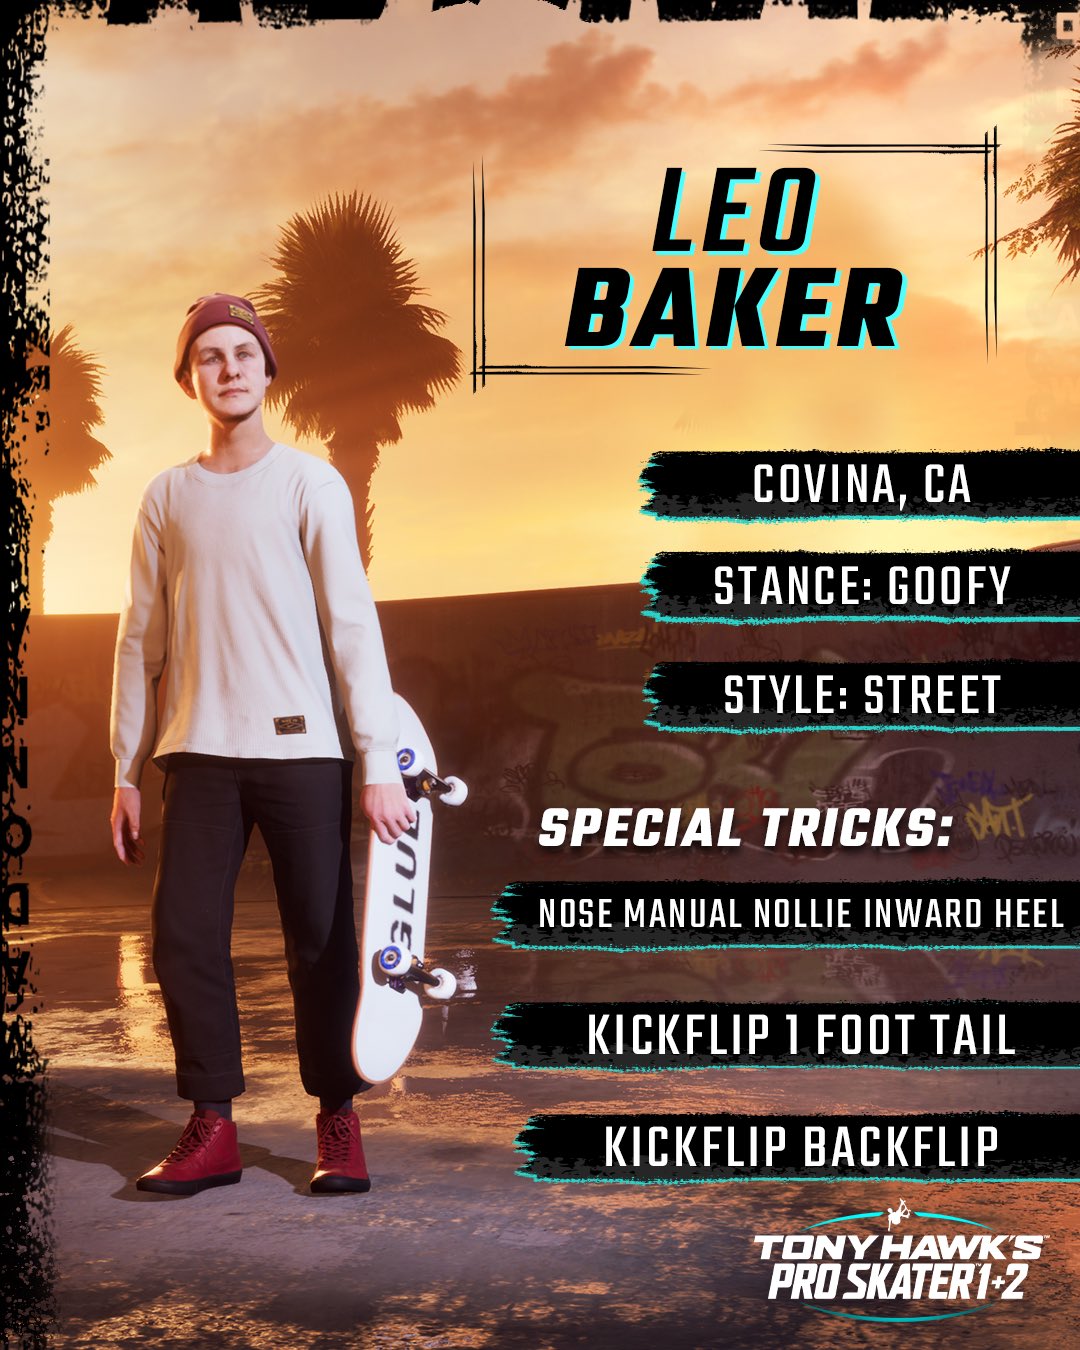 Out skater Leo Baker added to Tony Hawk's Pro Skater 1 and 2